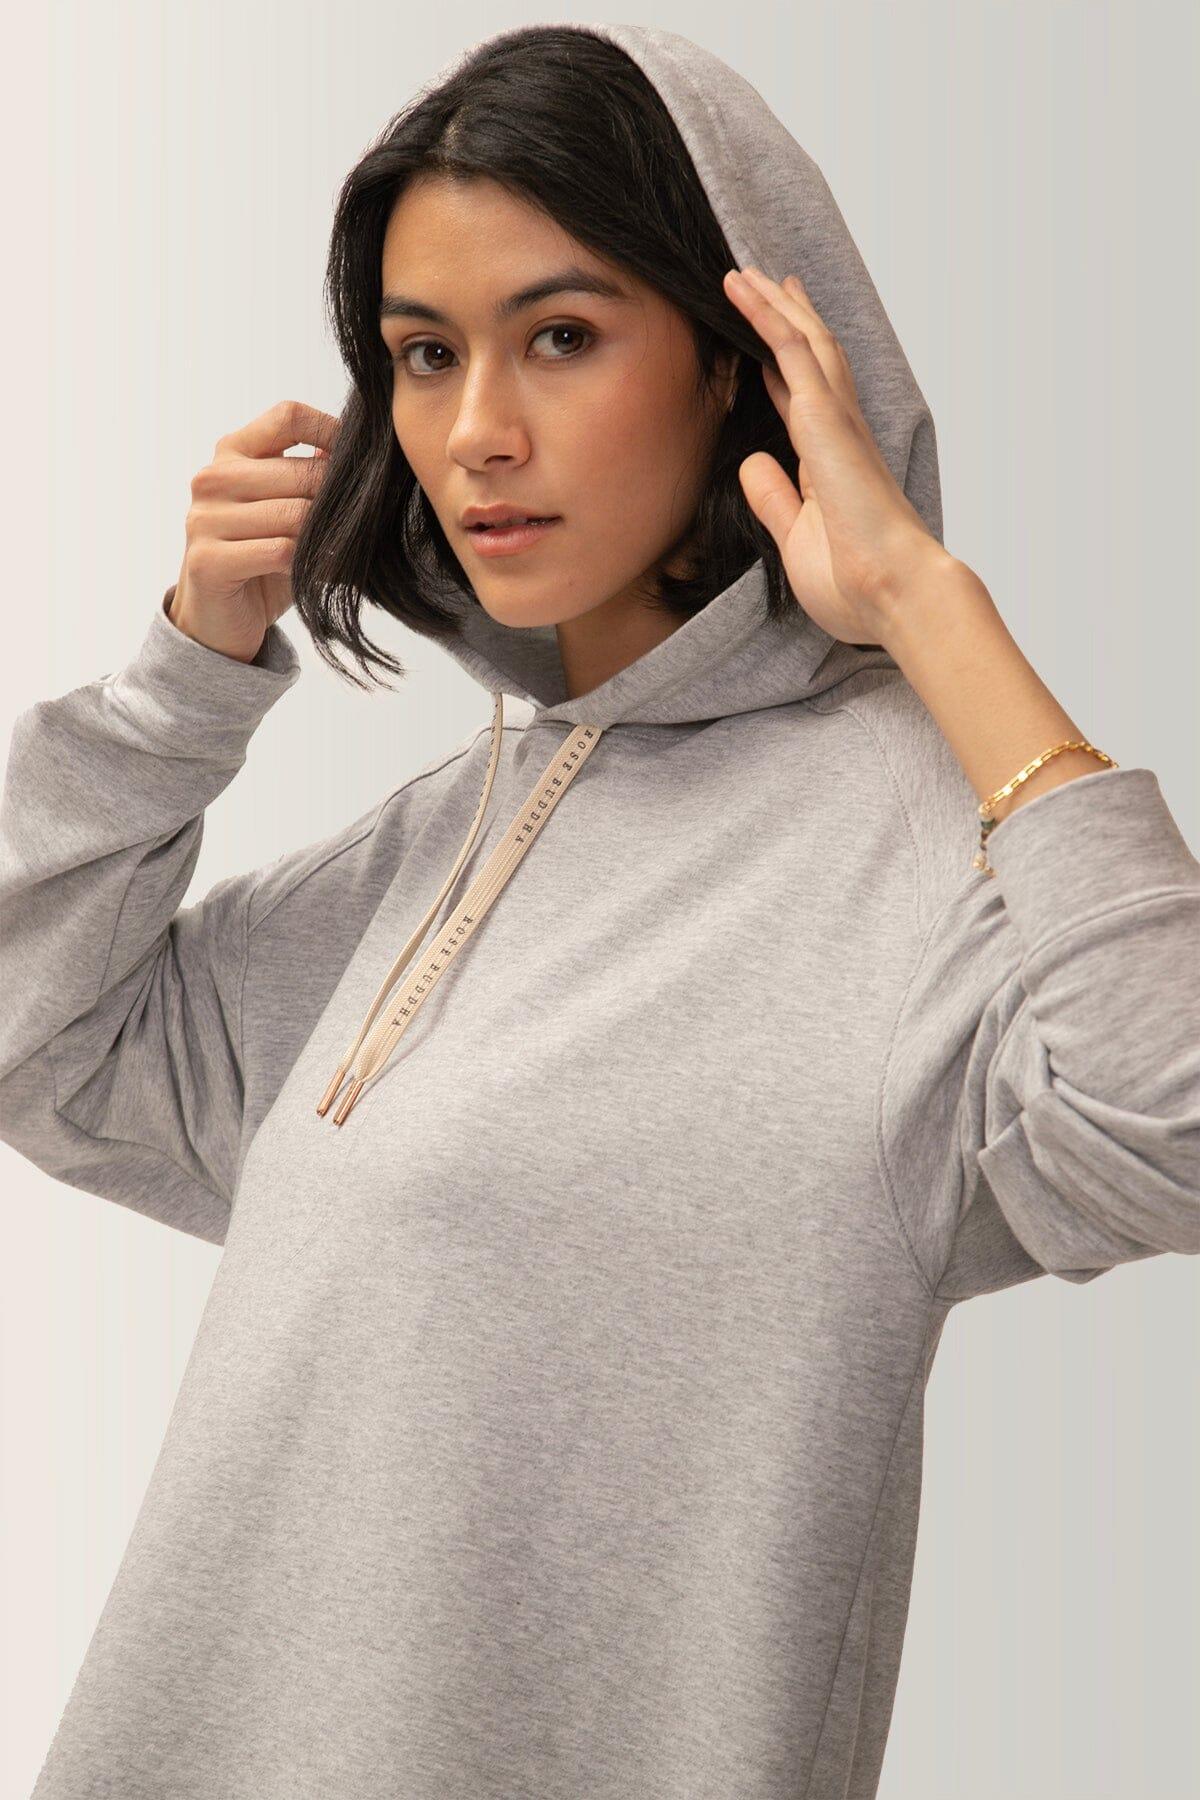 Femme qui porte le chandail Chill out de Rose Boreal./ Women wearing the Chill Out Hoodie by Rose Boreal. -Moon